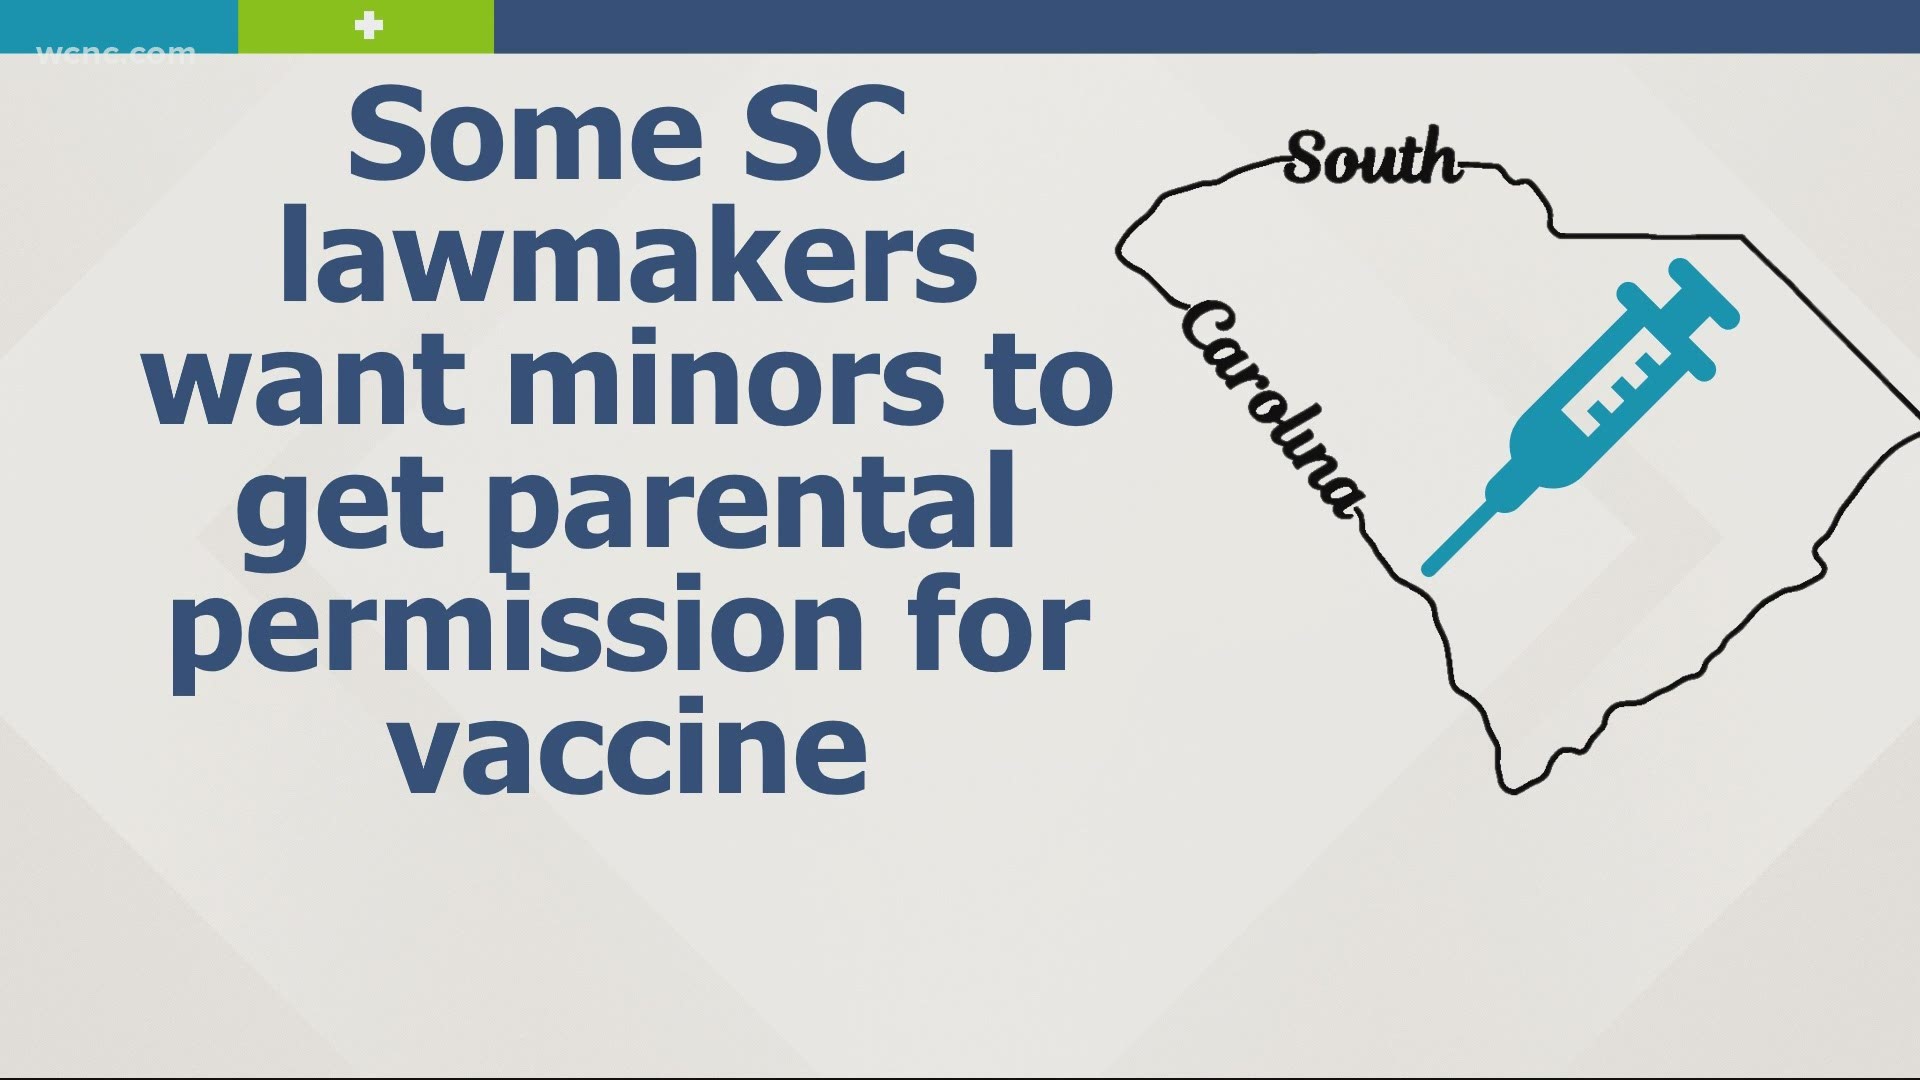 Currently, South Carolina doesn't require teens 16 and older to get parental consent for the COVID-19 vaccine. Some state lawmakers are looking to change that.